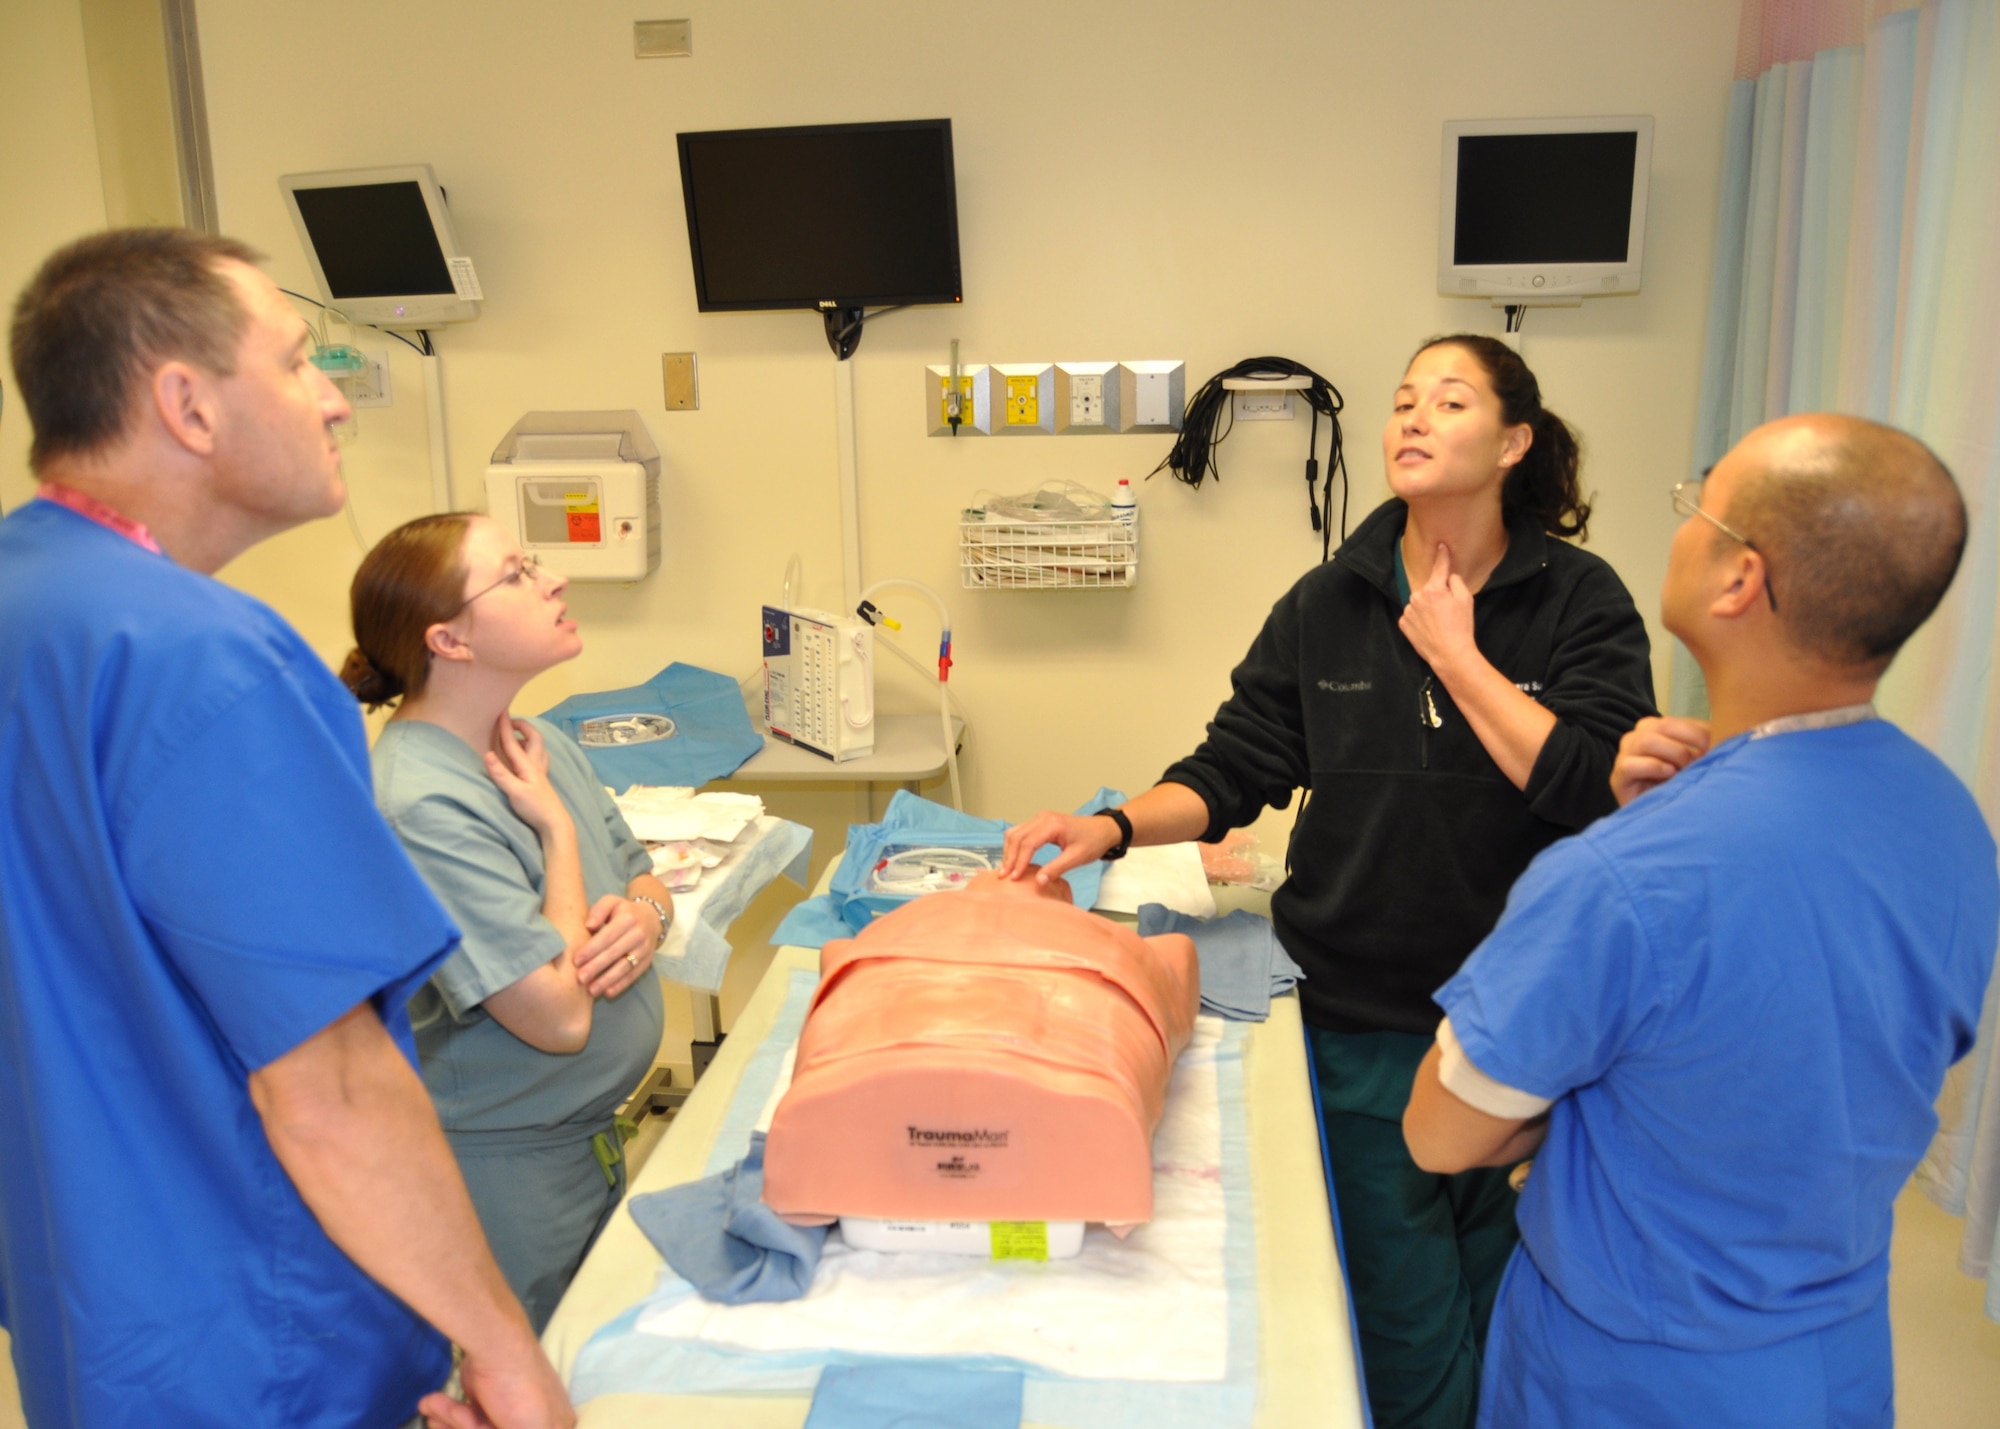 General surgery resident Capt. (Dr.) Andrea Blake, 81st Surgical Operations Squadron,
second from right, demonstrates both on herself and a mannequin where to make an incision to place a breathing tube in a patient’s throat during the ATLS course. Students are, from left, Lt. Col. (Dr.) Richard Liotta, a reservist assigned to the 94th Aeromedical Staging Squadron at Dobbins Air Reserve Base, Ga.; and Capts. (Drs.) Lauren Herrmann and Minh Ho, 81st Medical Operations Squadron.  (U.S. Air Force photo by Steve Pivnick)